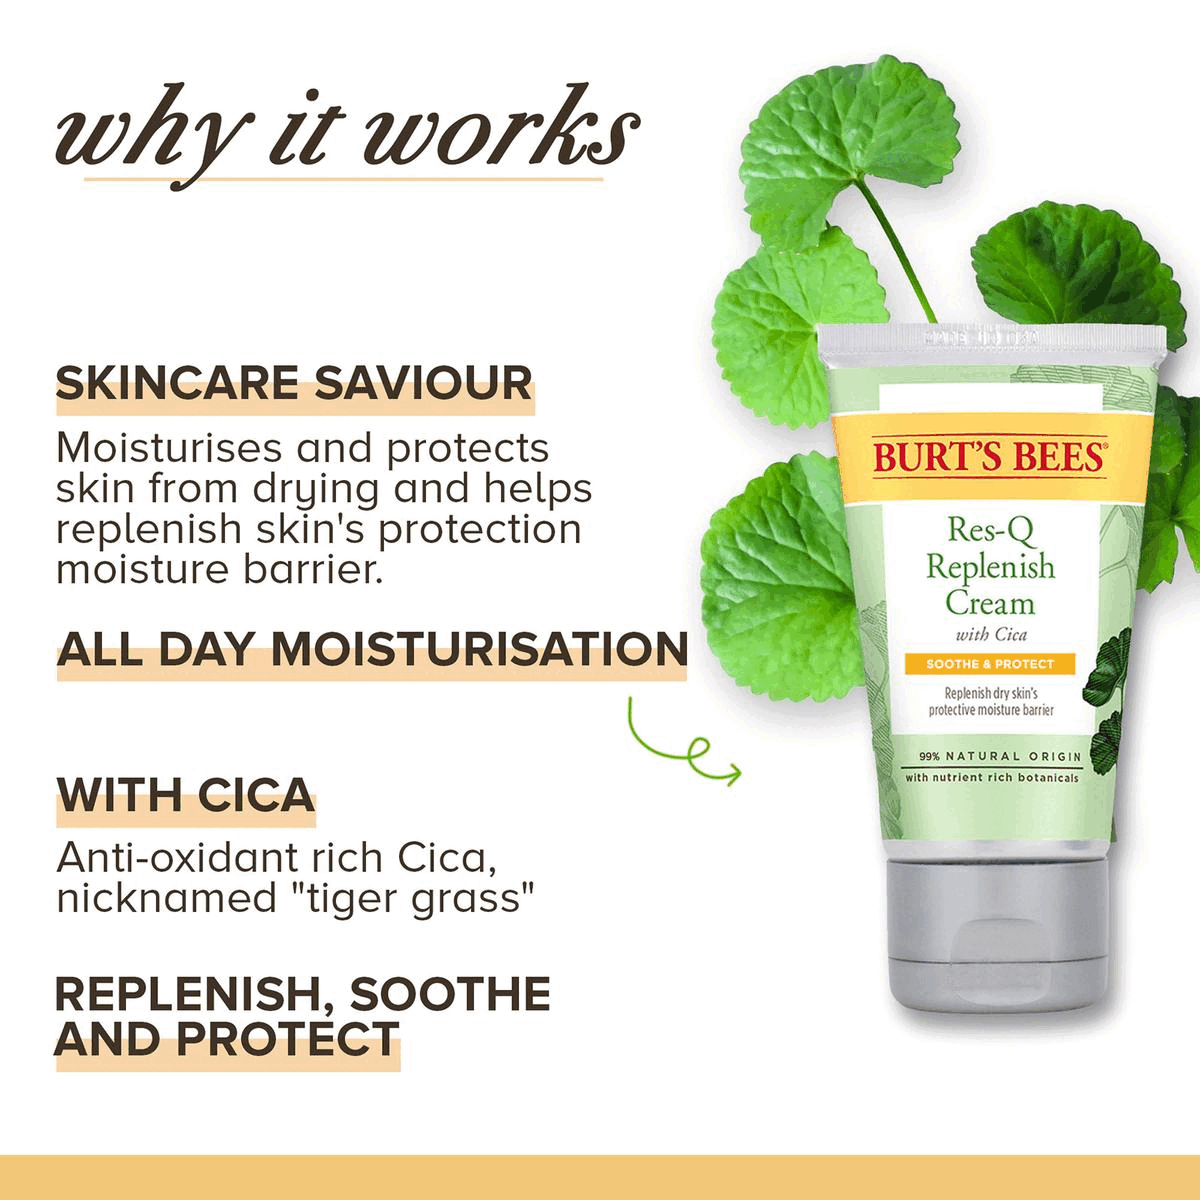 
            why it works, skincare saviour moisturises and protects skin from drying and helps replenish skin's protection moisture barrier,
            all day moisturisation,
            with cica anti-oxidant rich cica, nicknamed tiger grass,
            KIND TO SKIN & PLANET SINCE 1984 
            Ingredients From Nature 
            Leaping Bunny Certified 
            Landfill-free Operations 
            oiA 
            Responsible Sourcing 
            Recyclable Packaging
            